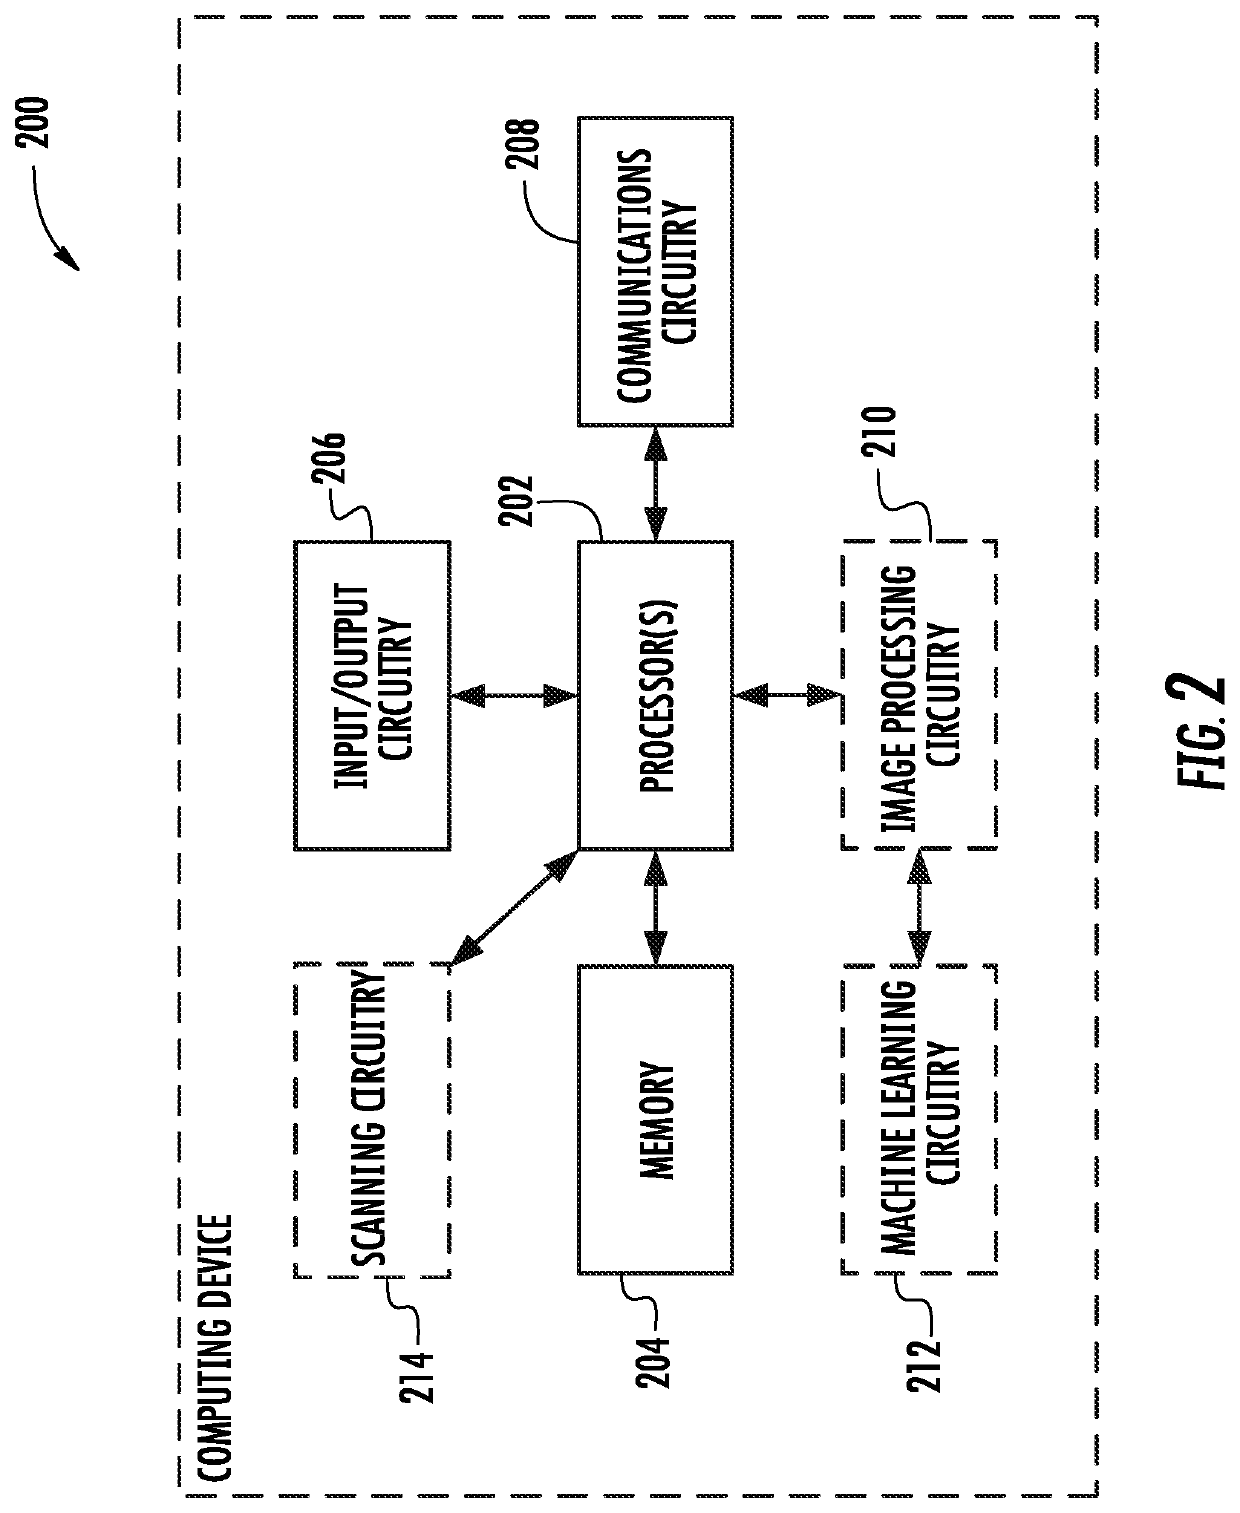 Systems, methods, and computer program products for access-related safety determinations